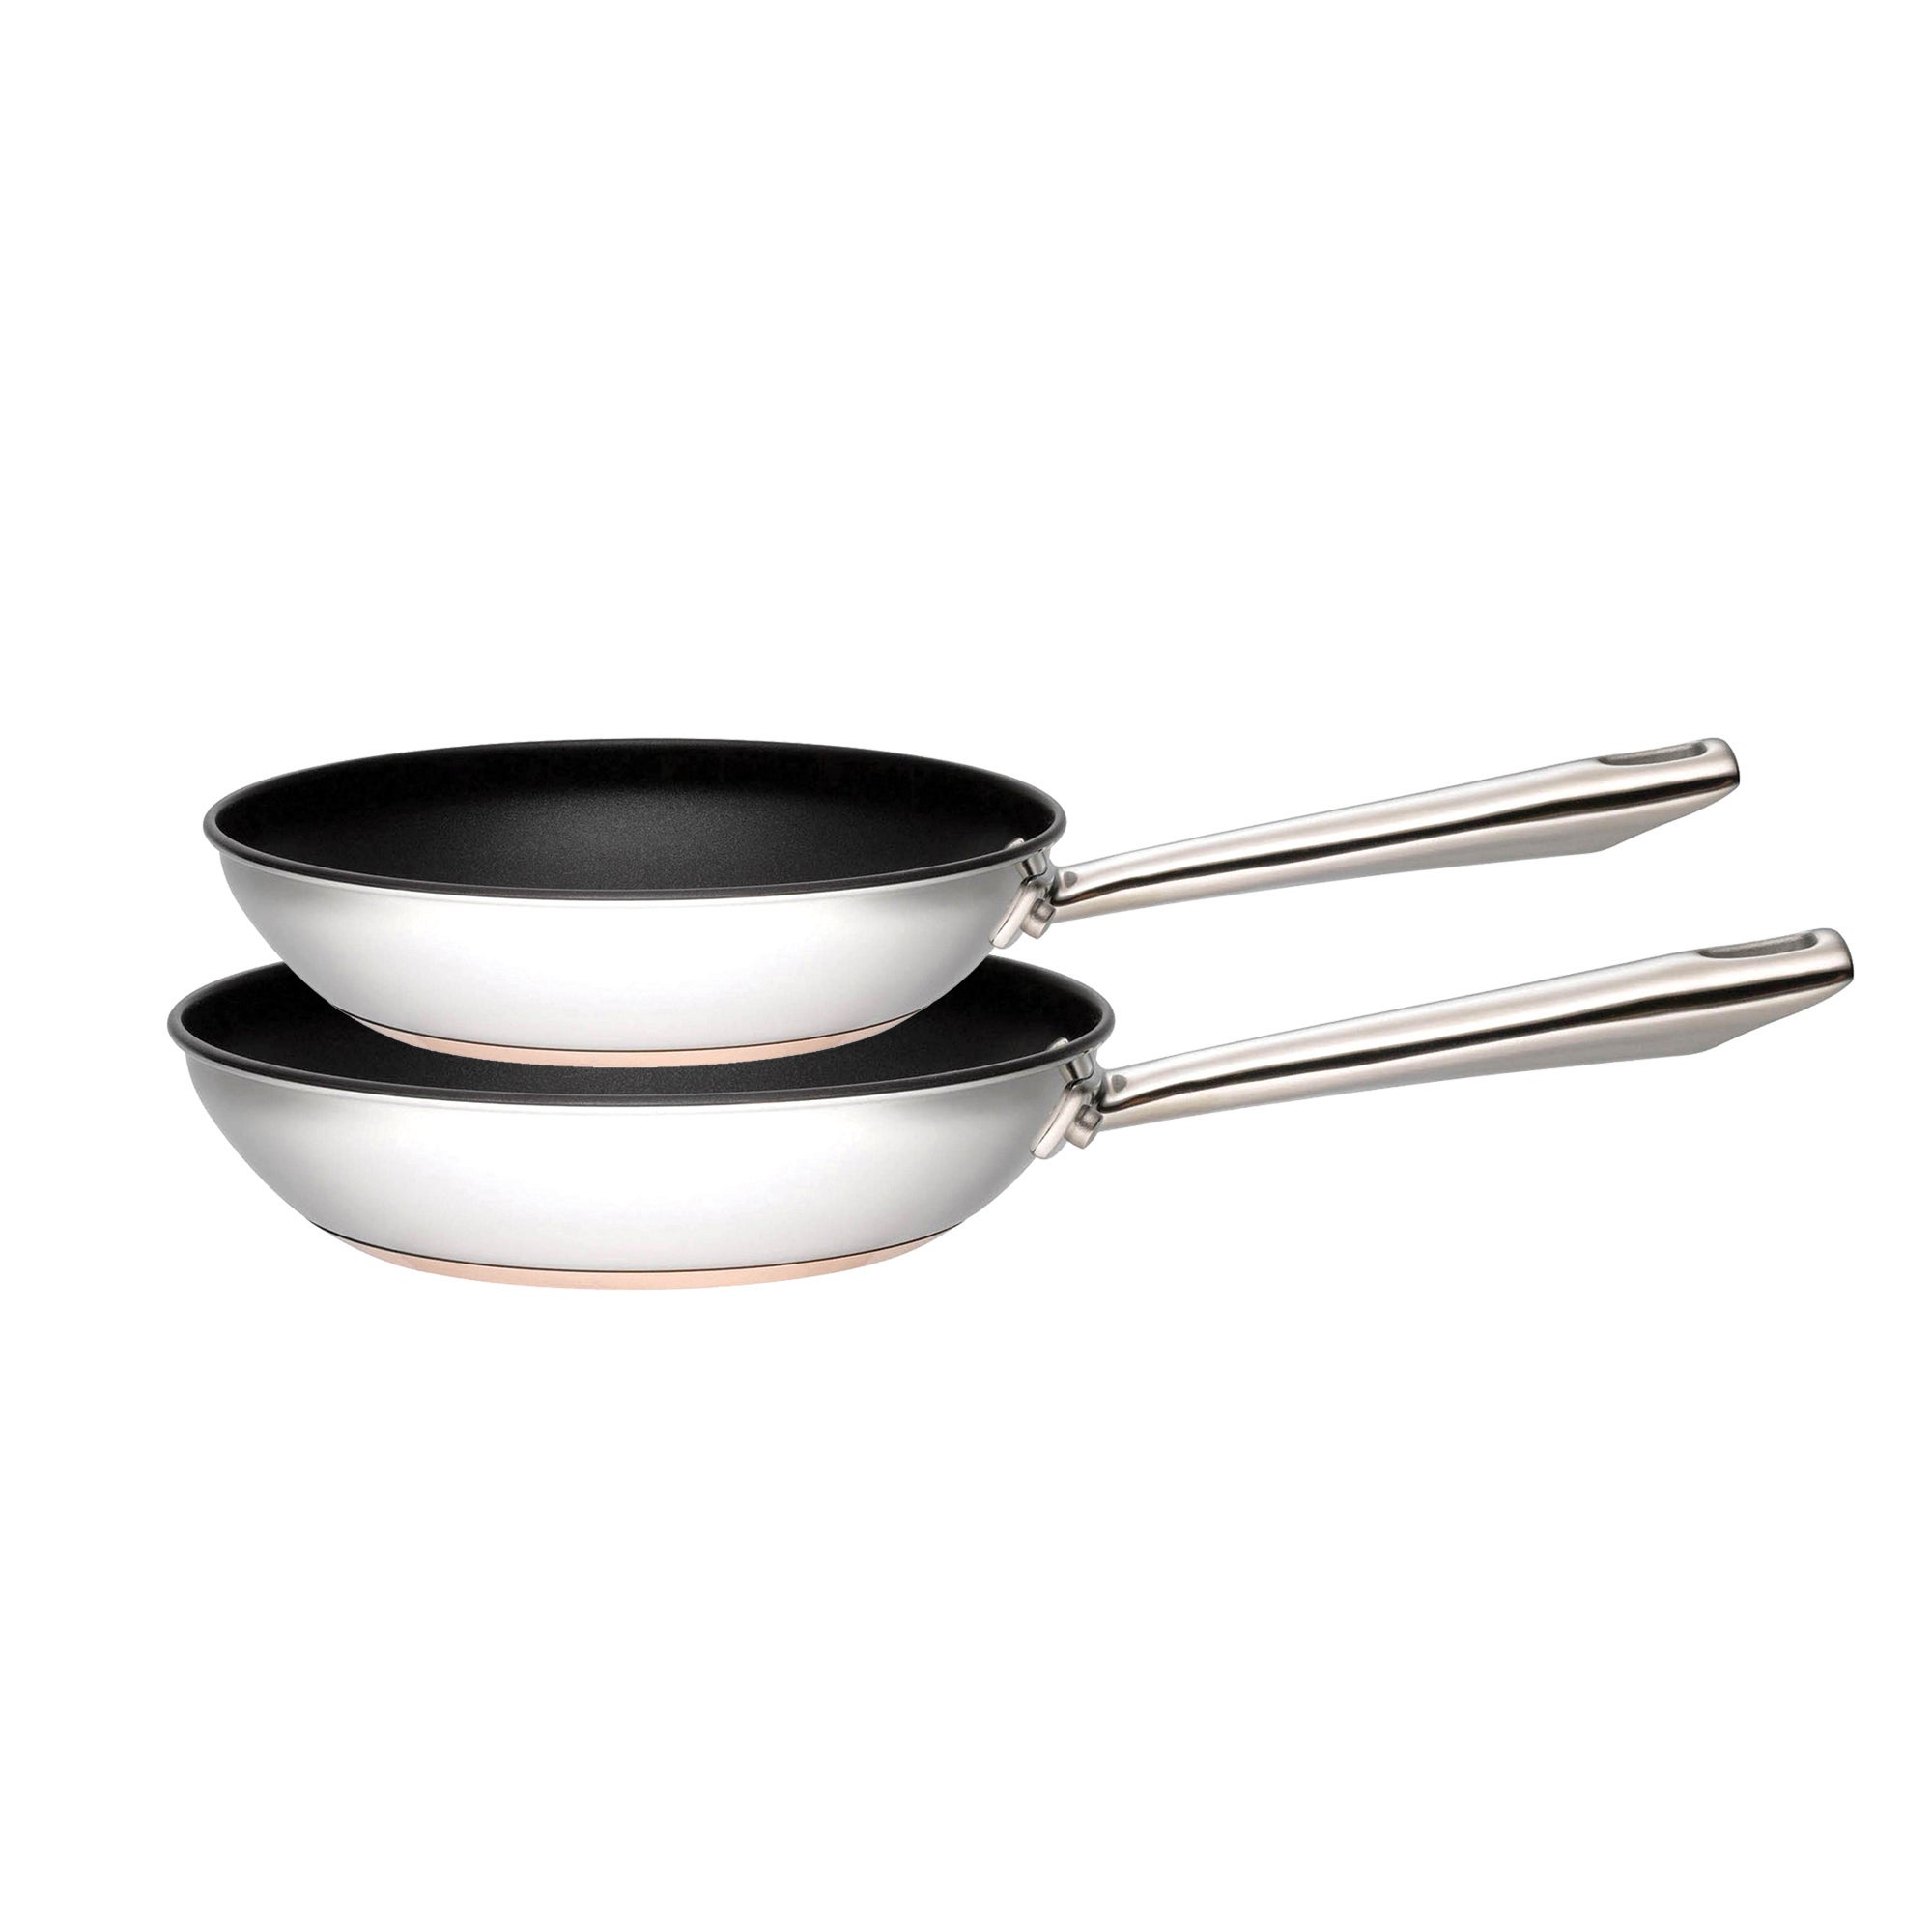 Pro Copper Base Non-Stick Stainless Steel 2 Piece Frying Pan Set